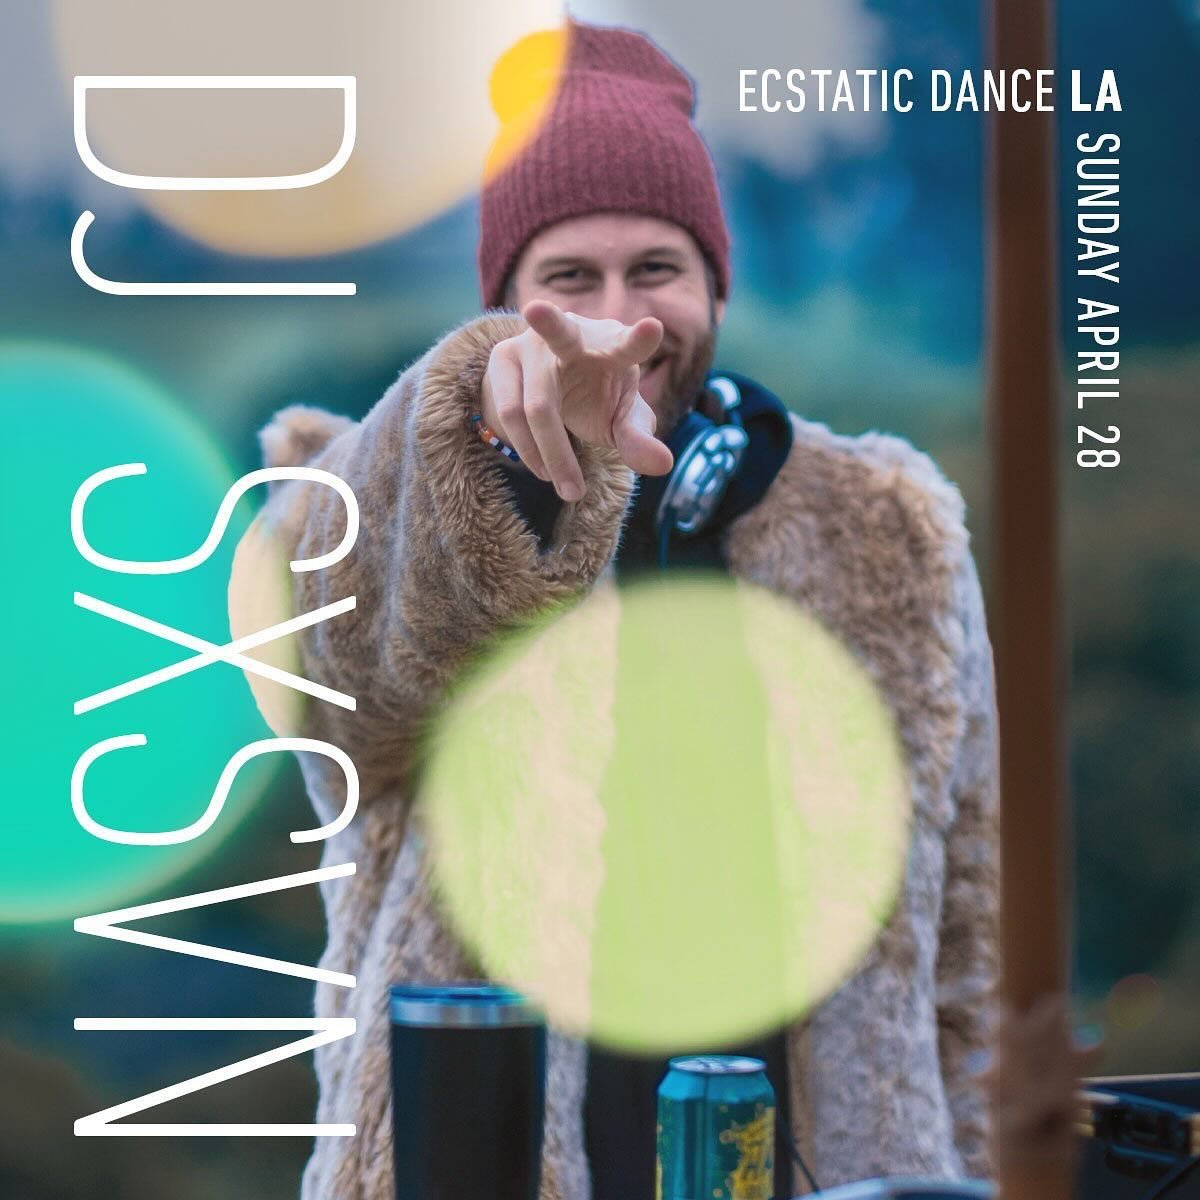 Dive into the eclectic sounds of SXSVN this Sunday at Ecstatic Dance LA! Join us in Venice Beach&rsquo;s scenic Rose Ave endpoint, where SXSVN will be spinning a tapestry of sounds that spans genres and eras!

🎧 Hailing from Minneapolis, SXSVN bring